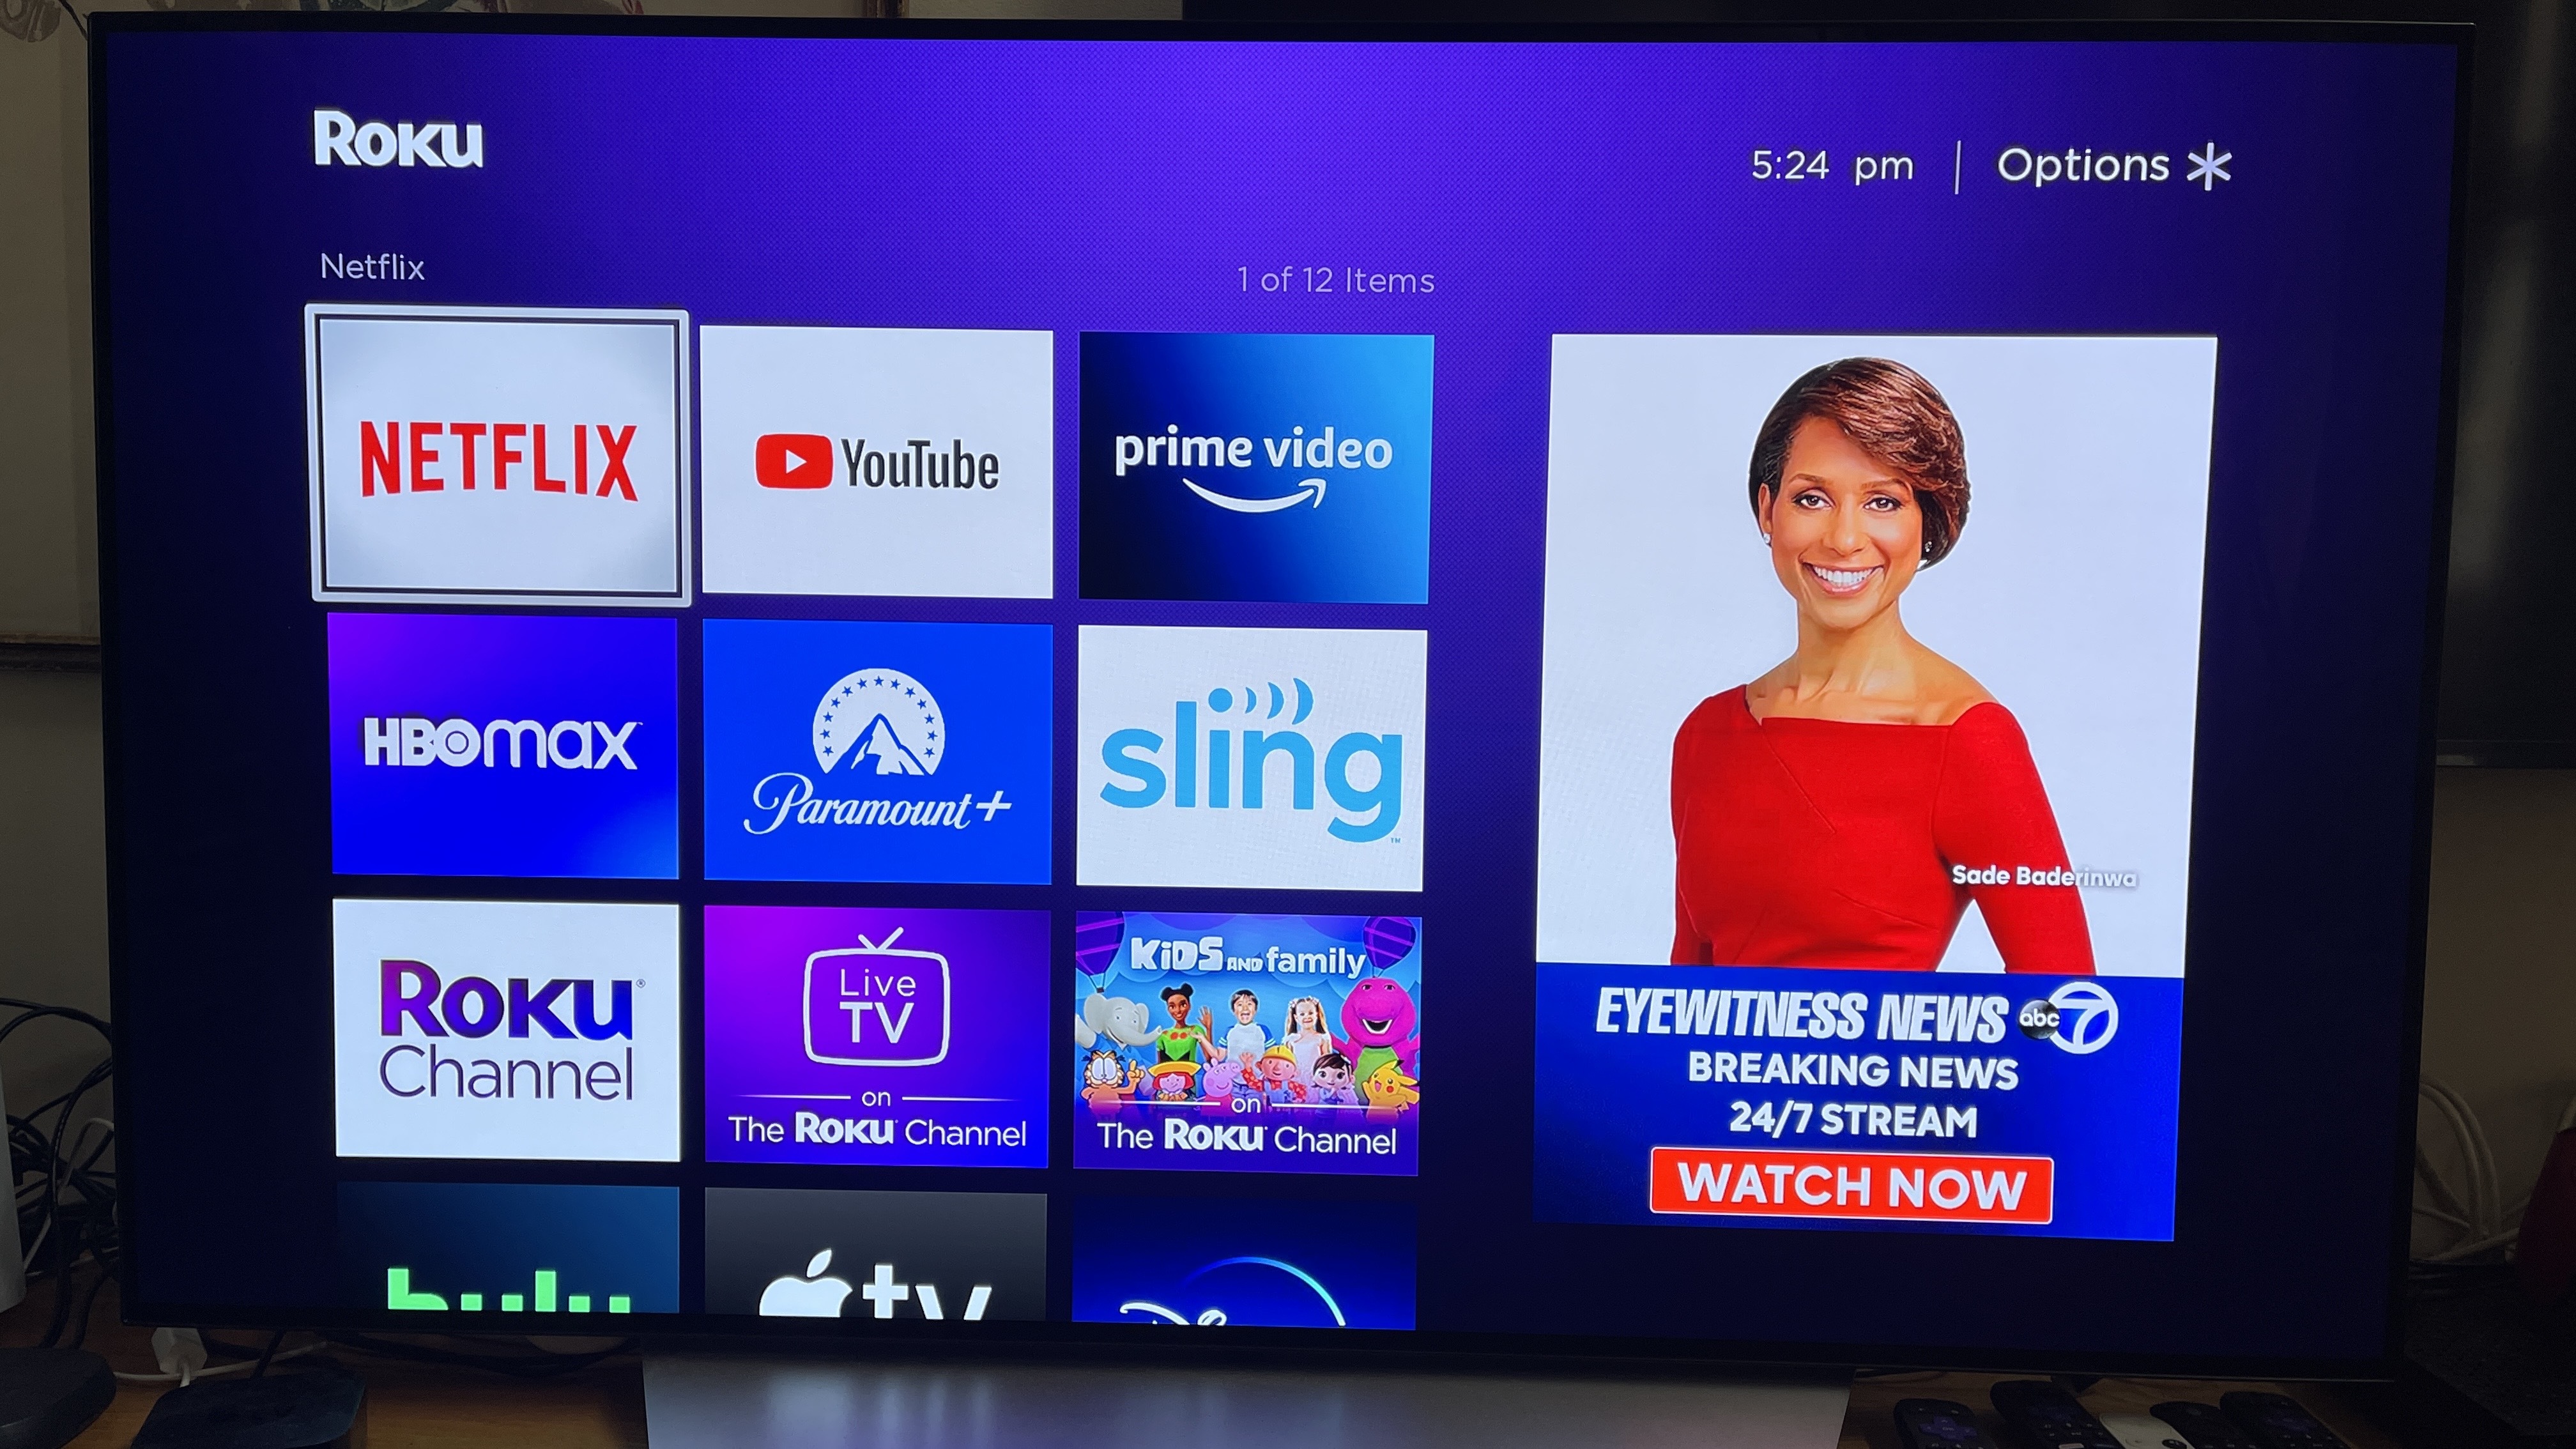 Visiting the Roku Home screen is the first step in removing a Roku app